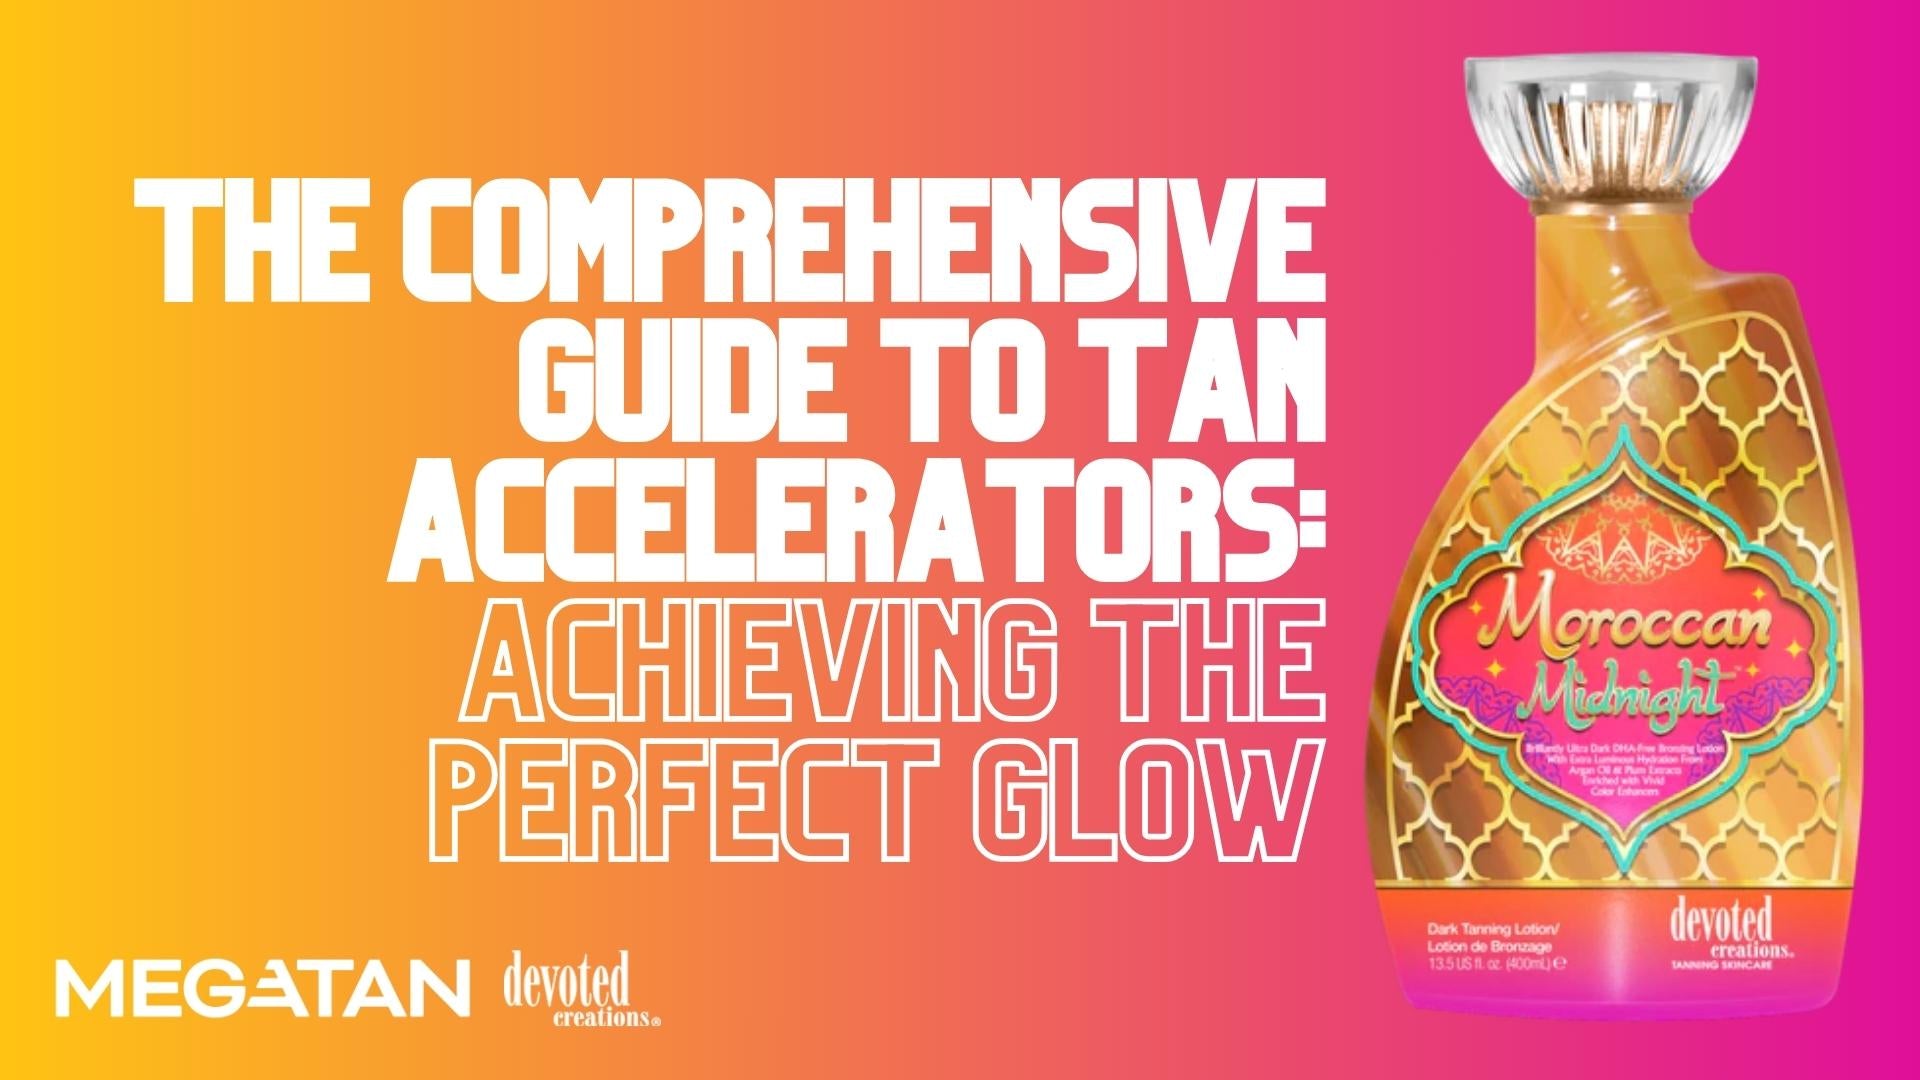 Tan accelerator: What is it, and how does it work